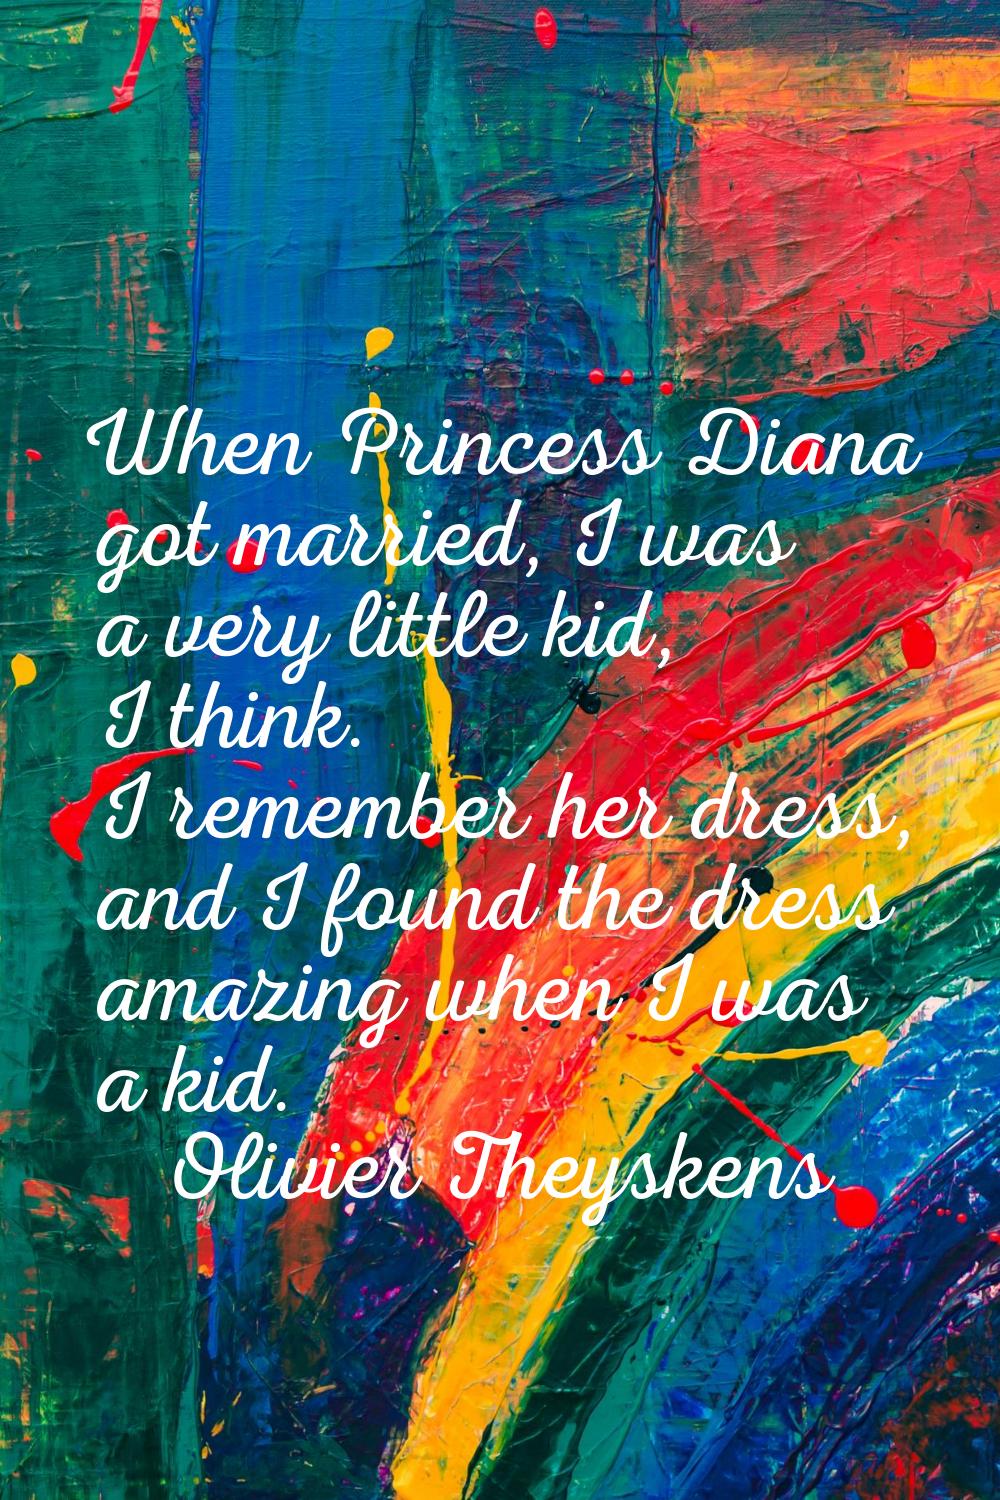 When Princess Diana got married, I was a very little kid, I think. I remember her dress, and I foun